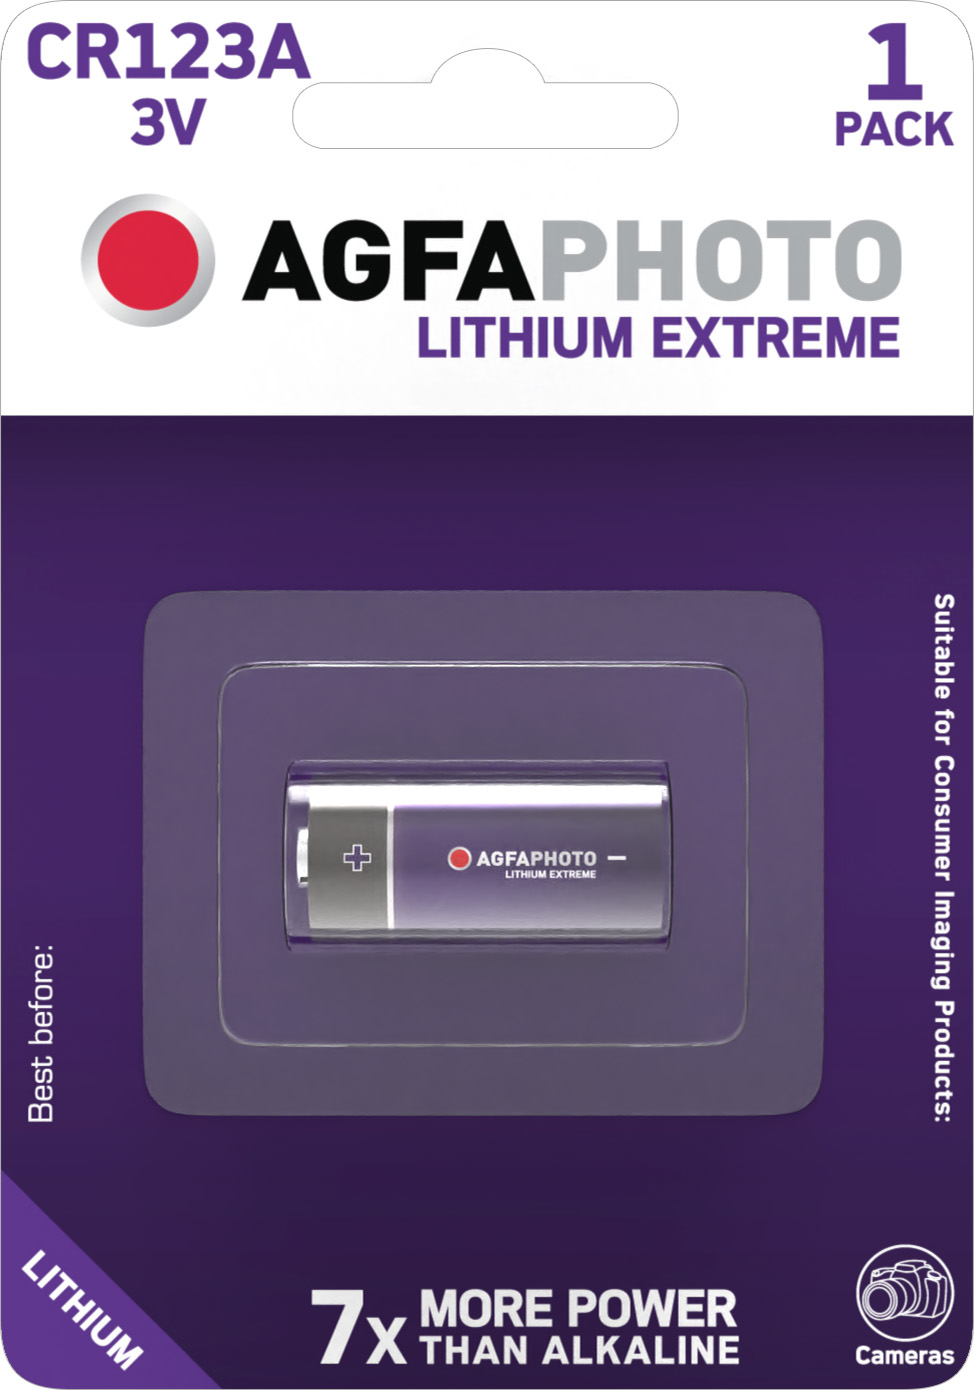 Agfaphoto Batterie Lithium, CR123A, 3V Extreme Photo, Retail Blister (1-Pack)